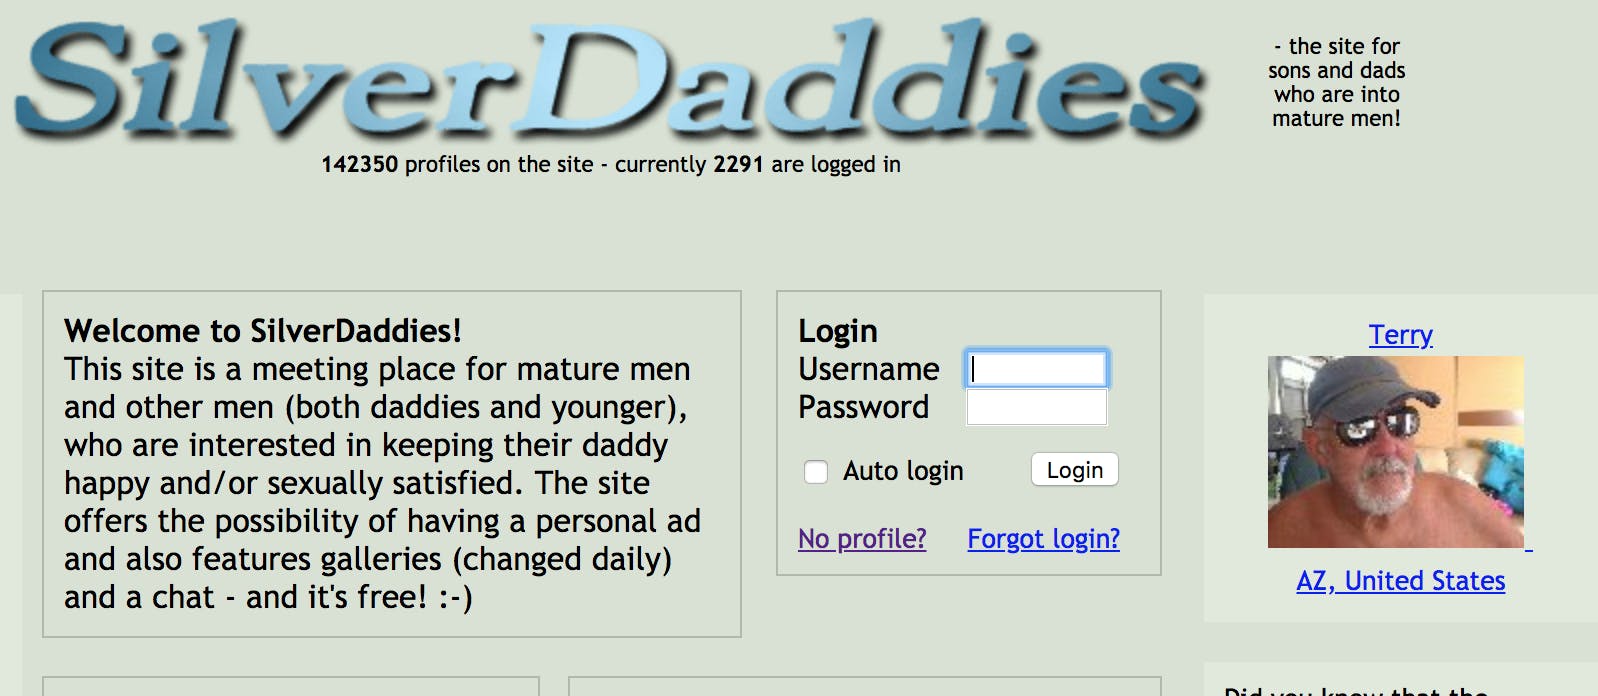 most popular gay dating apps : silver daddies